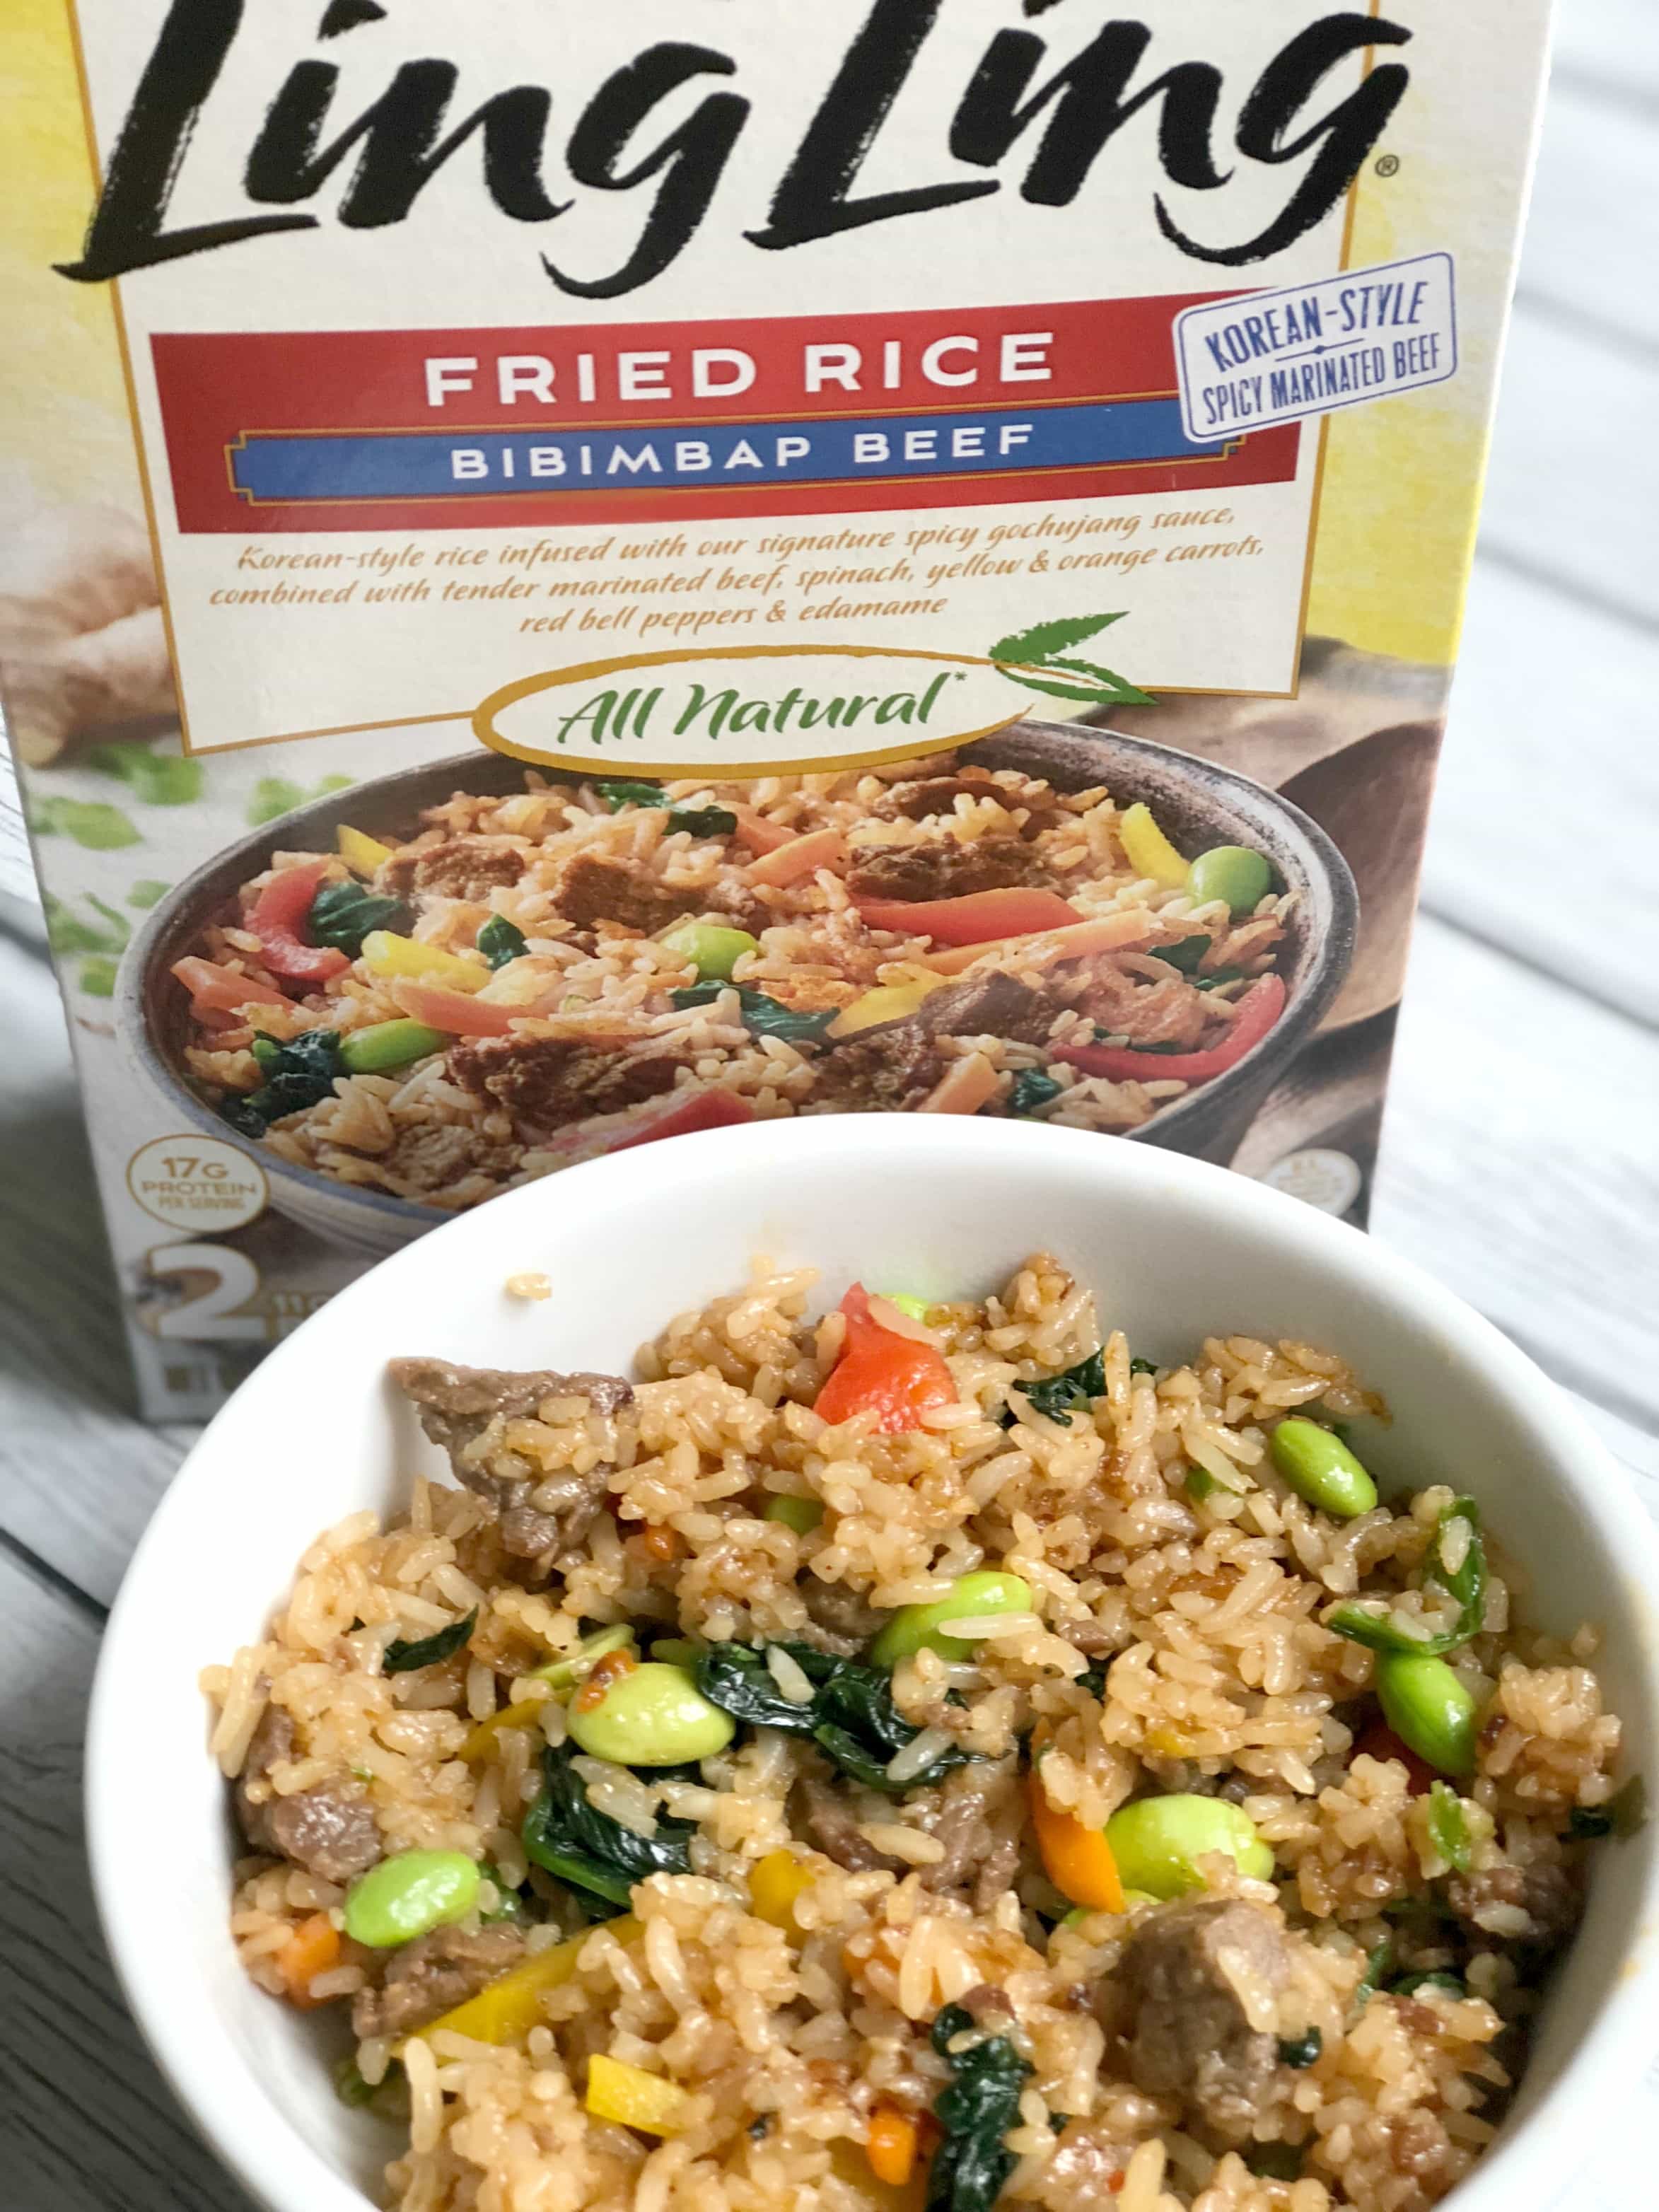 Ling Ling fried rice